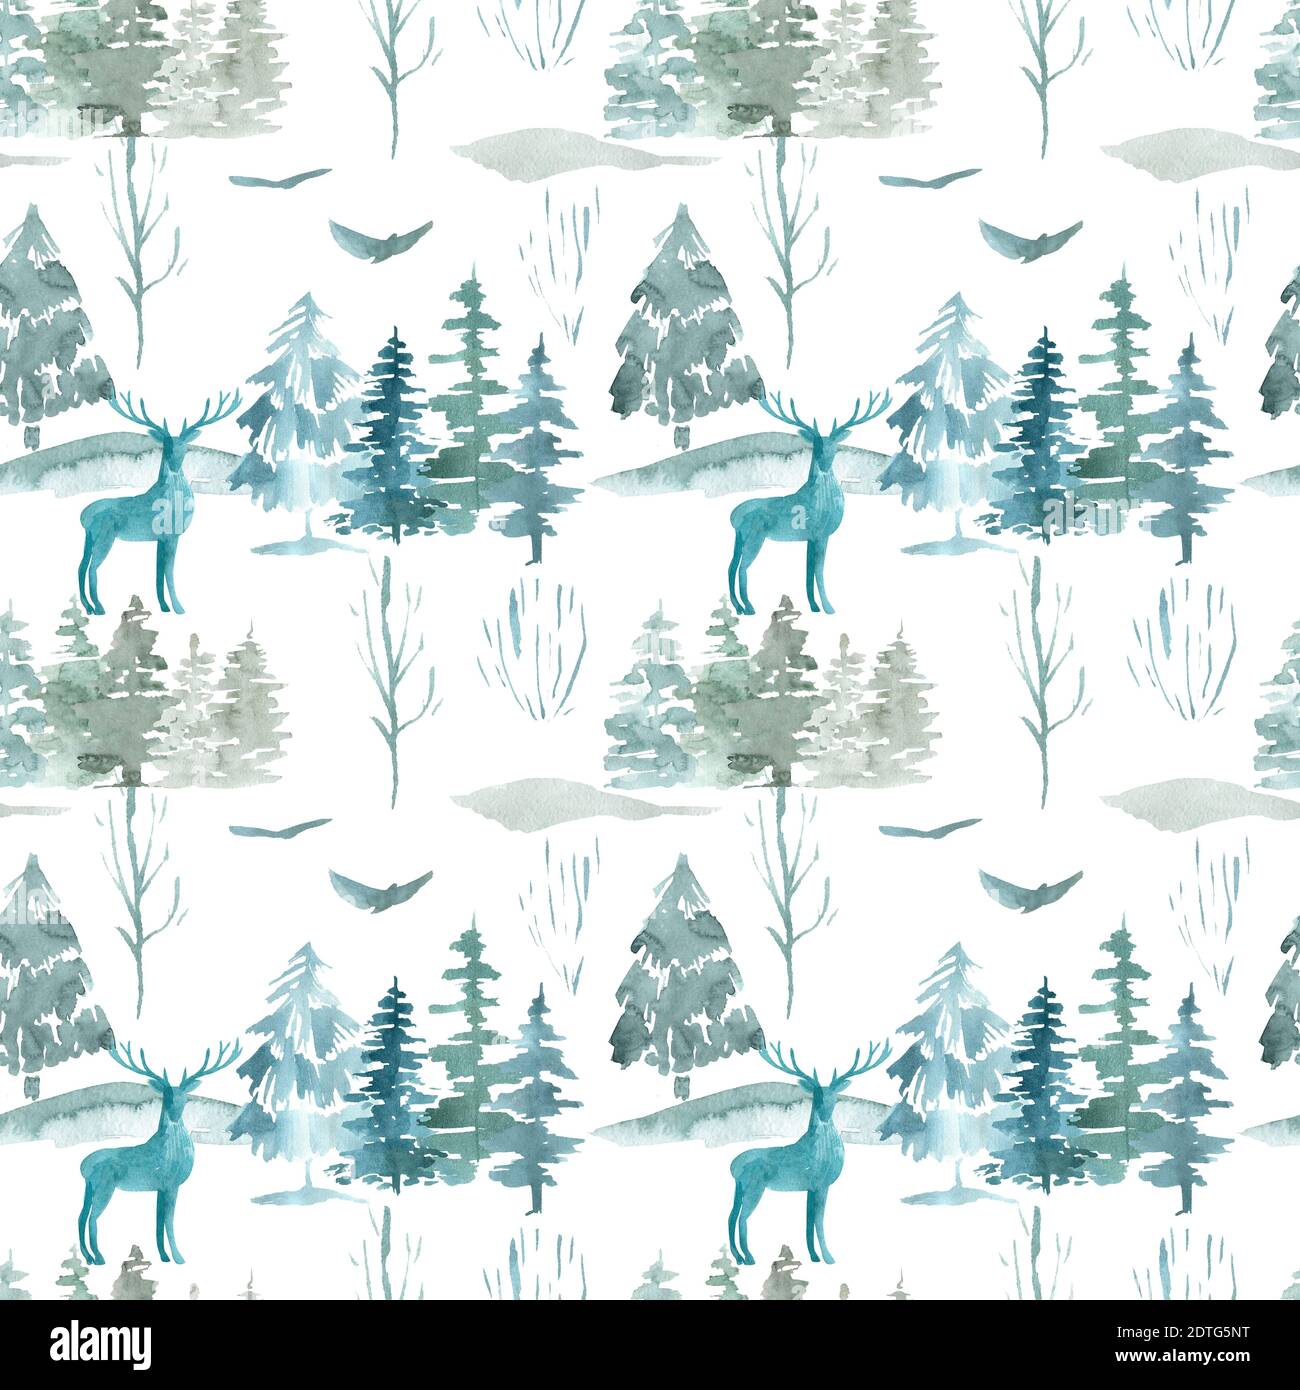 Scandinavian winter mysterious forest seamless pattern on white background. Watercolor illustration of woodland animals, pine trees, hills, birds Stock Photo